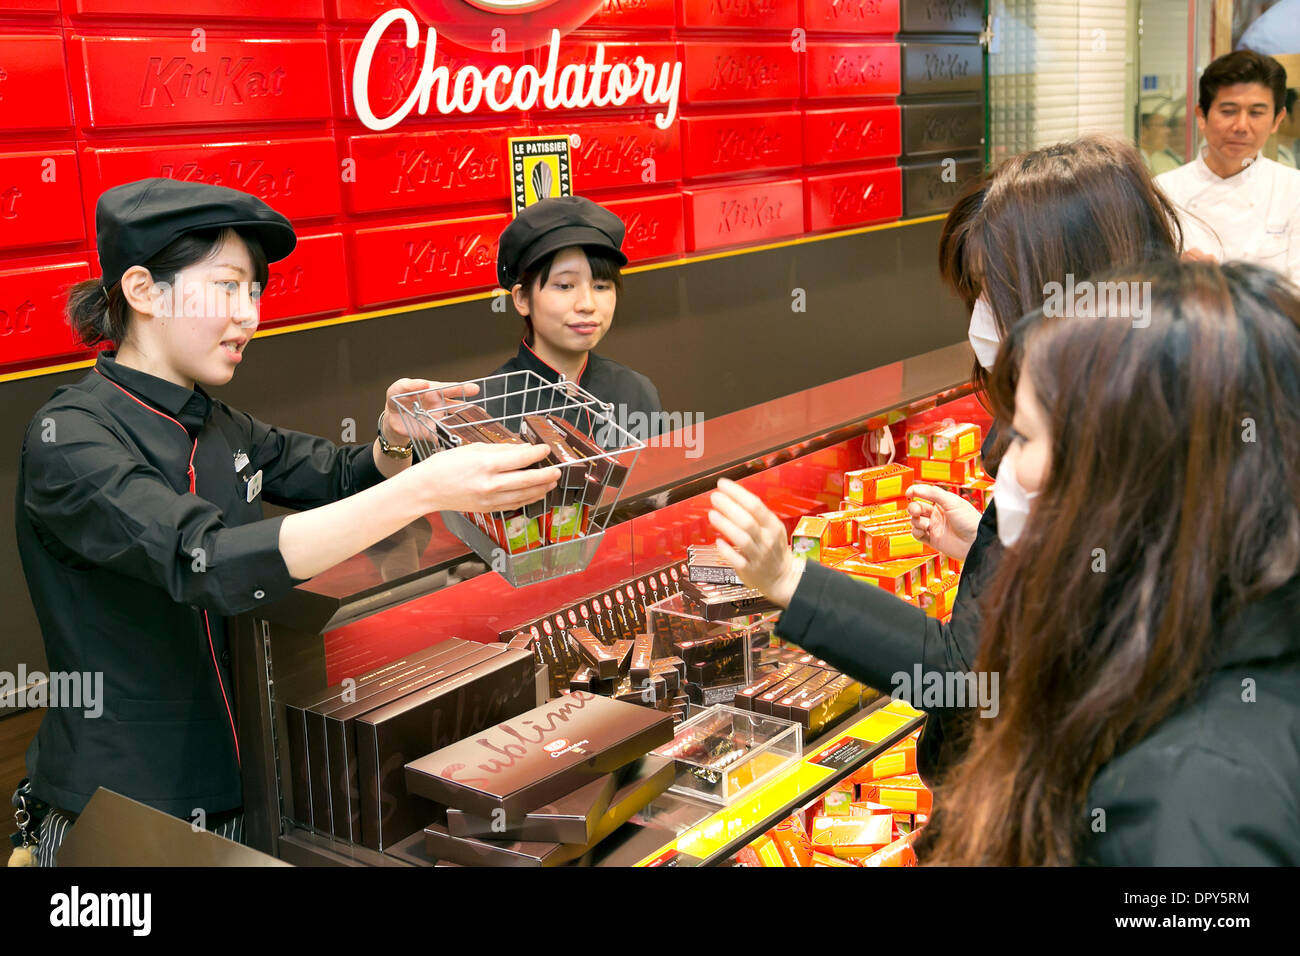 Tokyo, Japan. 17th January 2014.  Customers buy the first limited edition of Kit Kat products at the "Chocolatory", the first store in the world at Seibu Ikebukuro shopping building . The "Chocolatory" is a combination of chocolatier and chocolate factory. This is the first Kit Kat Chocolatory store in the world, the first limited edition are the "Special Cherry Blossom Green Tea", "Sublime Bitter" and "Special Chili", which has a chili pepper cream. Credit:  Rodrigo Reyes Marin/AFLO/Alamy Live News Stock Photo